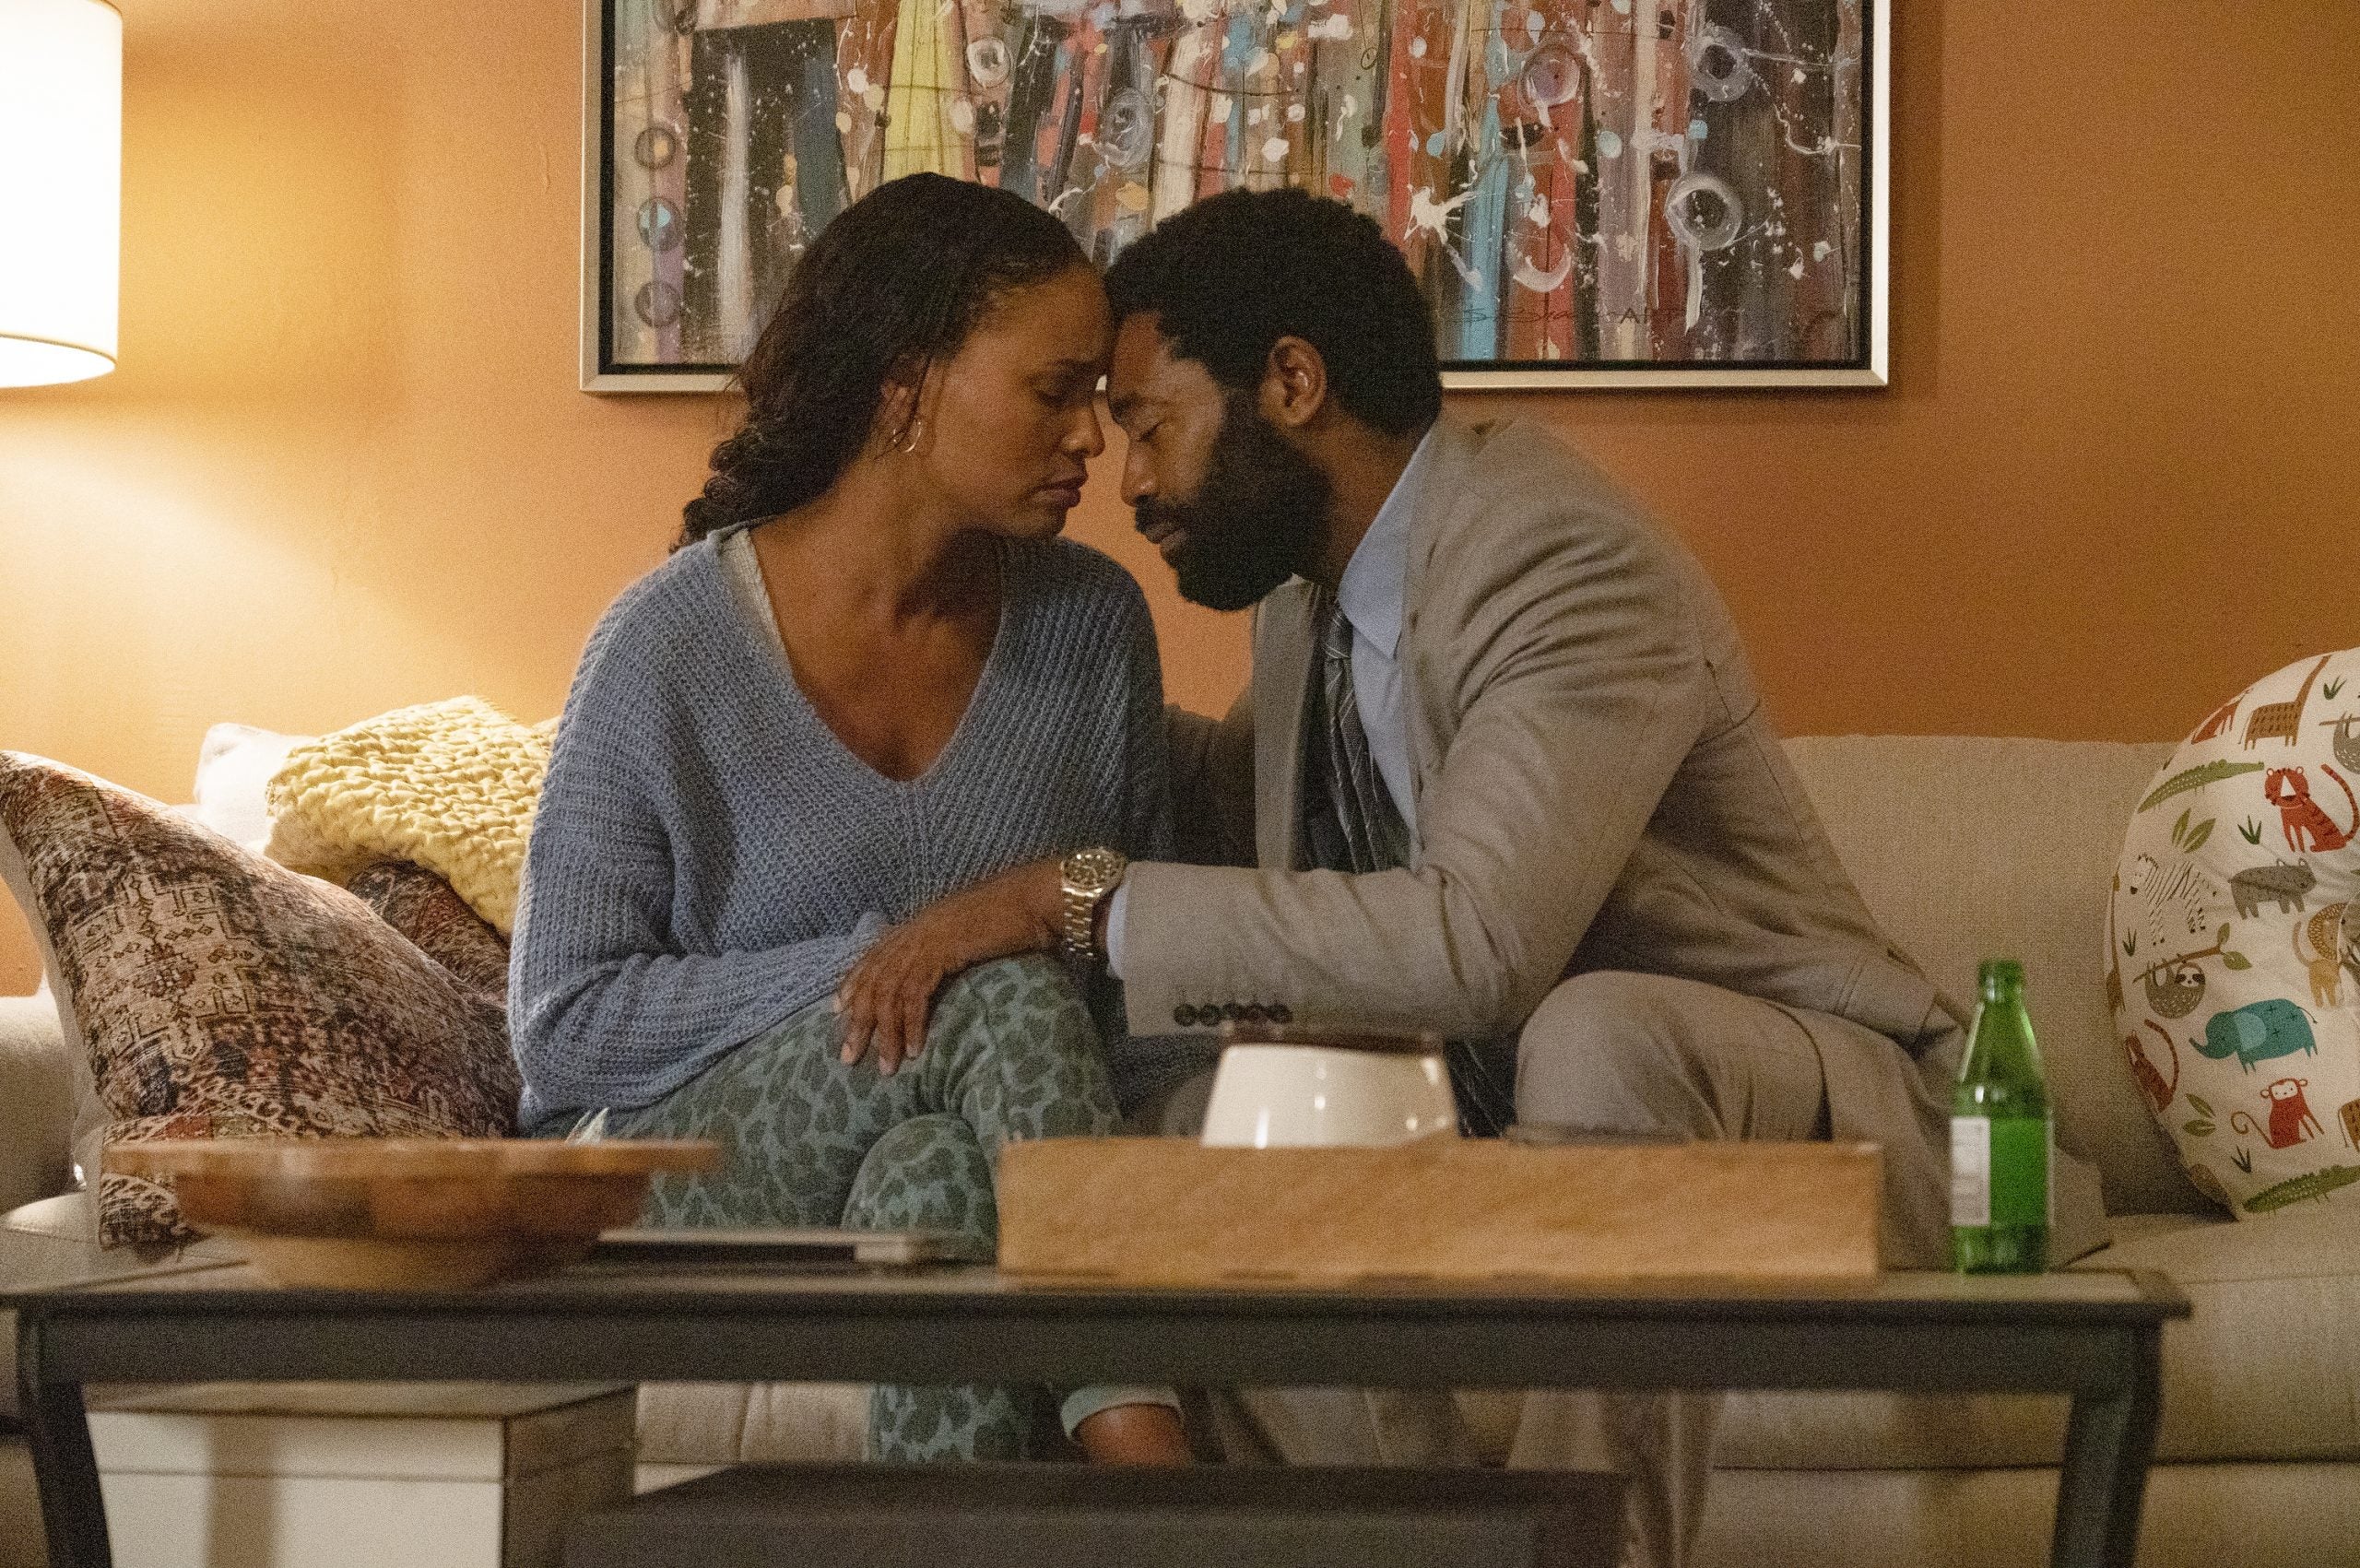 Joy Bryant’s Role In ‘For Life’ Pays Homage To The Grandmother Who Raised Her